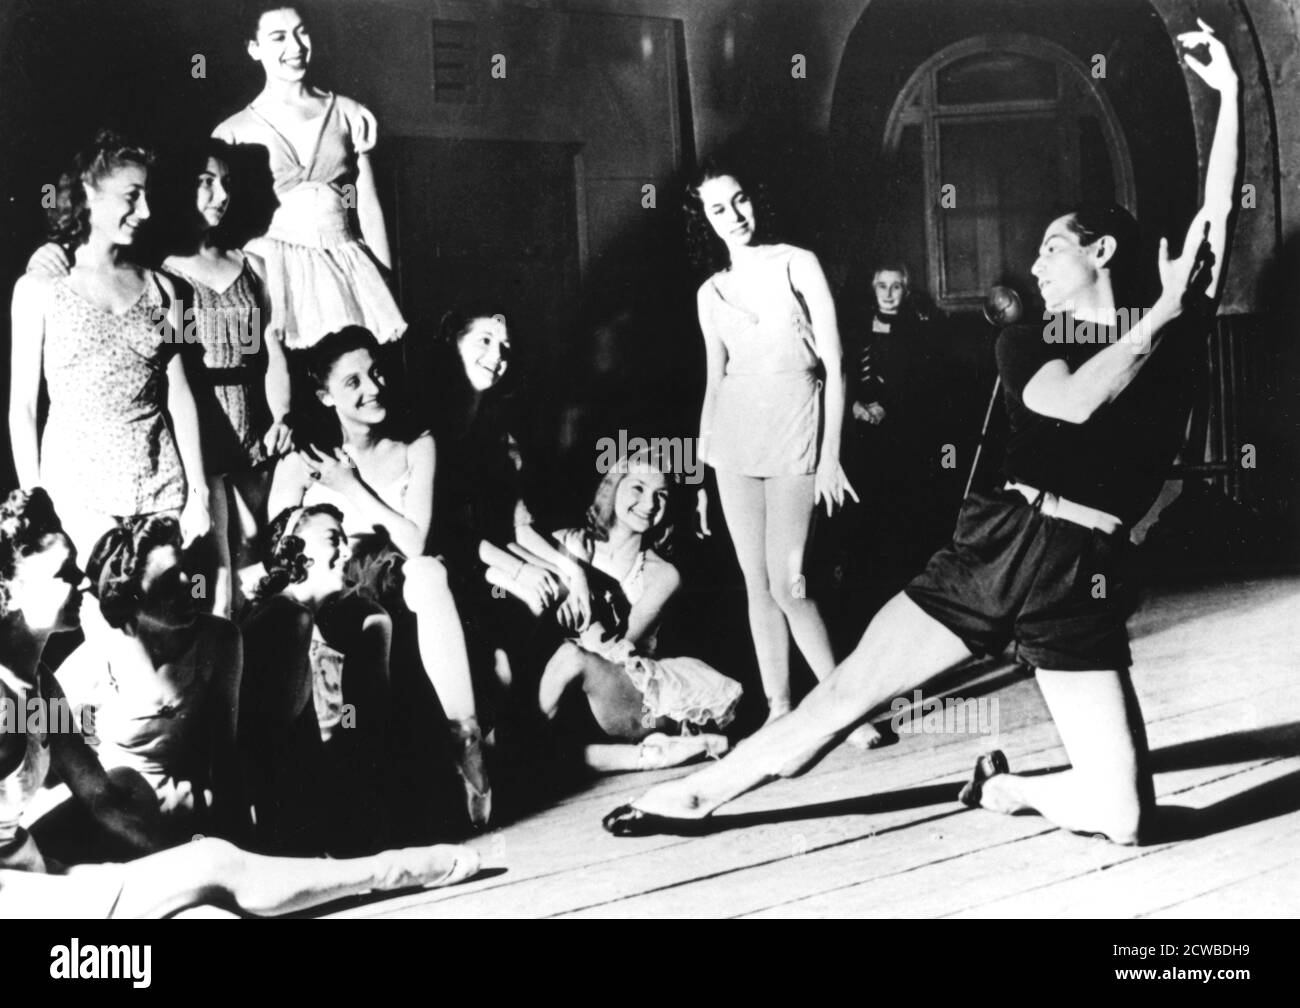 Serge Lifar and the Paris Opera Ballet, Paris, 1940-1944. Born in the Ukraine, Lifar (1905-1986) was appointed director of the Paris Opera Ballet in 1930. He was dismissed in 1945 because of his socialising with members of the German High Command during the Nazi Occupation of Paris, although Lifar claimed he was in fact working as an Allied agent. His lifetime banishment only lasted two years as he was reinstated in 1947. The photographer is unknown. Stock Photo